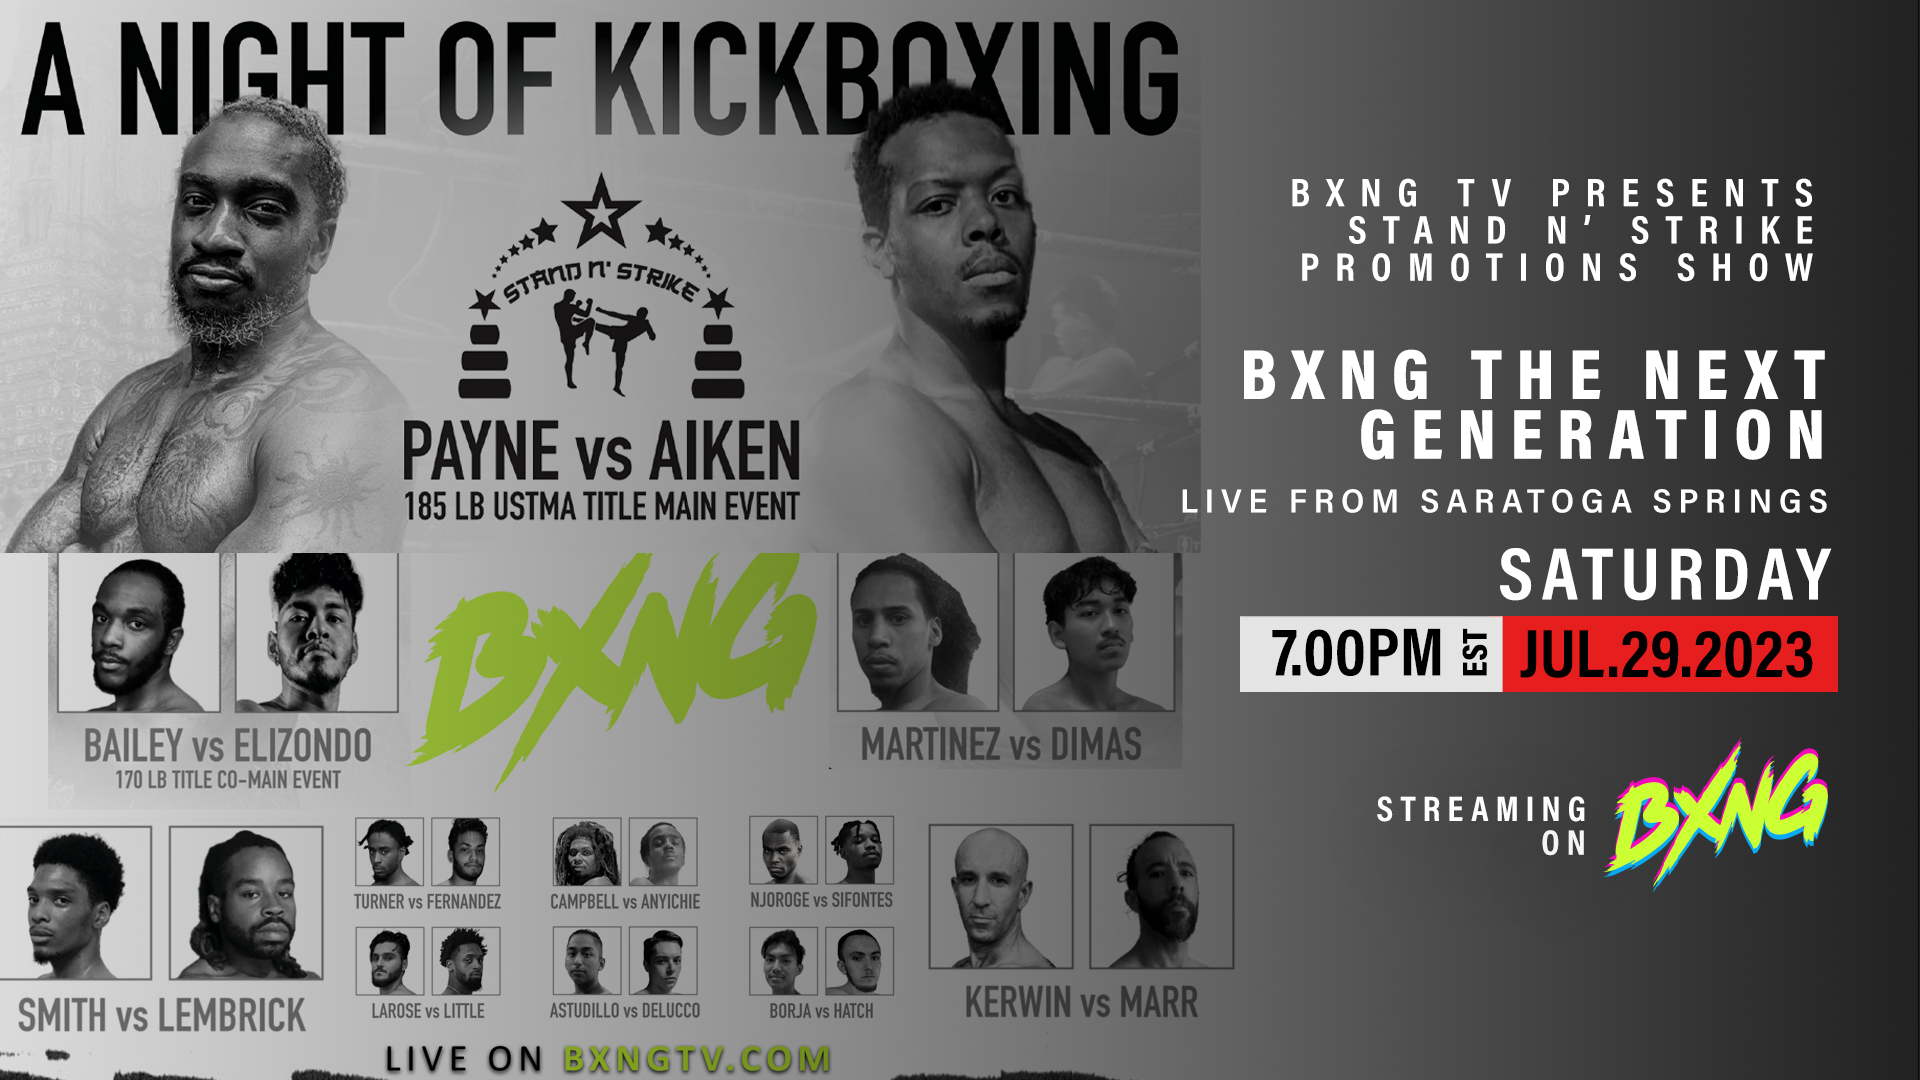 BXNG TV Presents Stand N Strike Promotions Muay Thai Show Live Stream 07/29/23